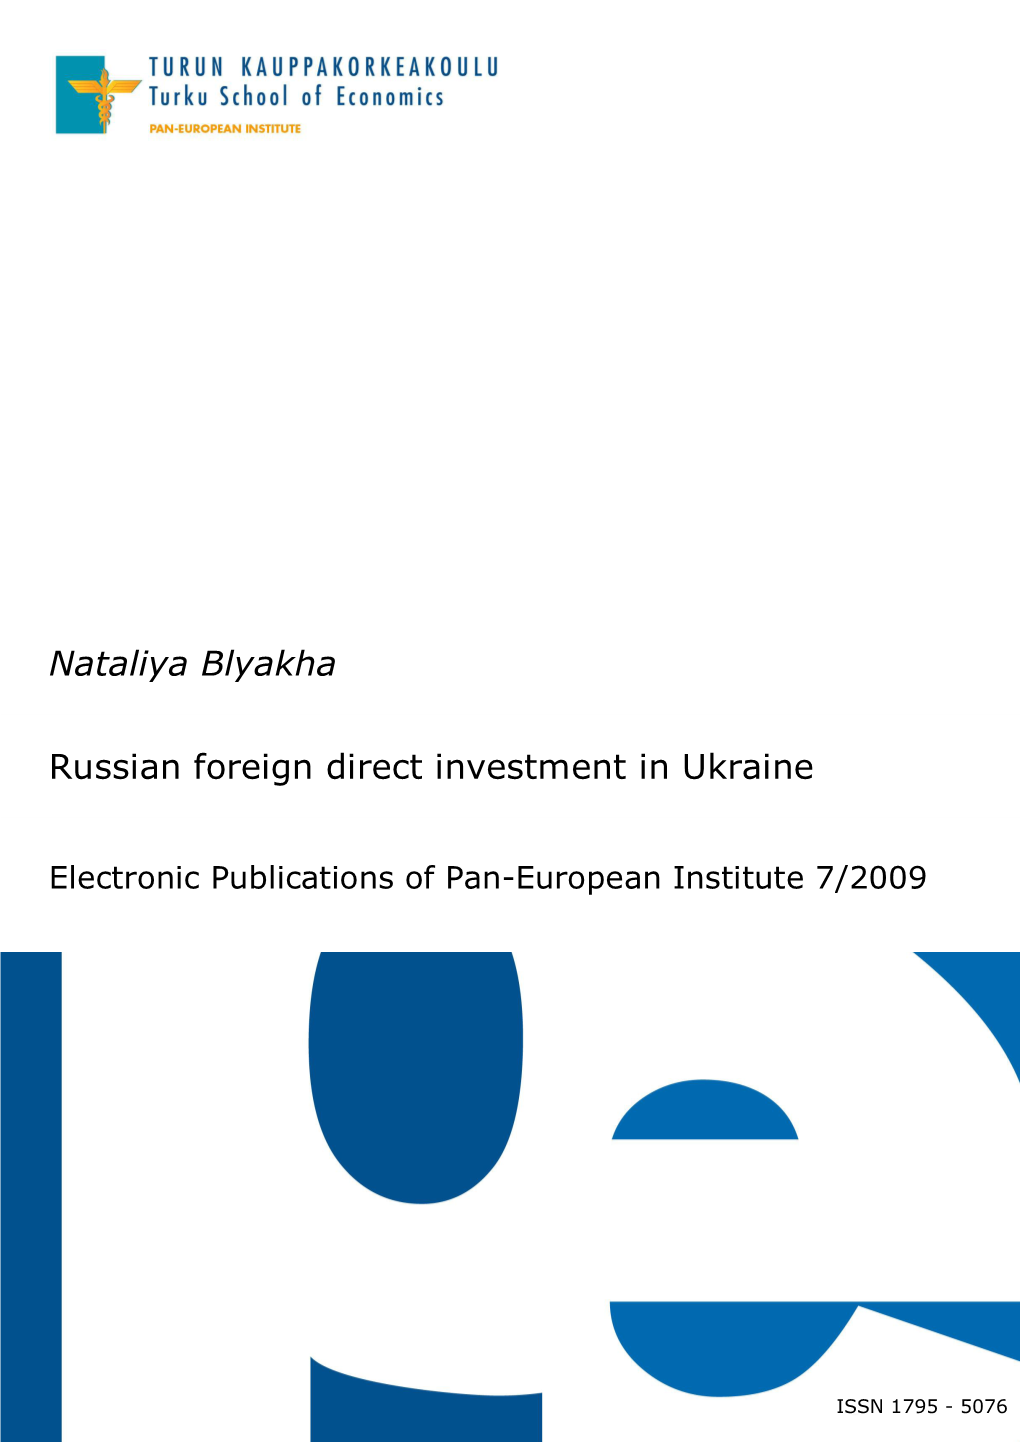 Russian Foreign Direct Investment in Ukraine Nataliya Blyakha